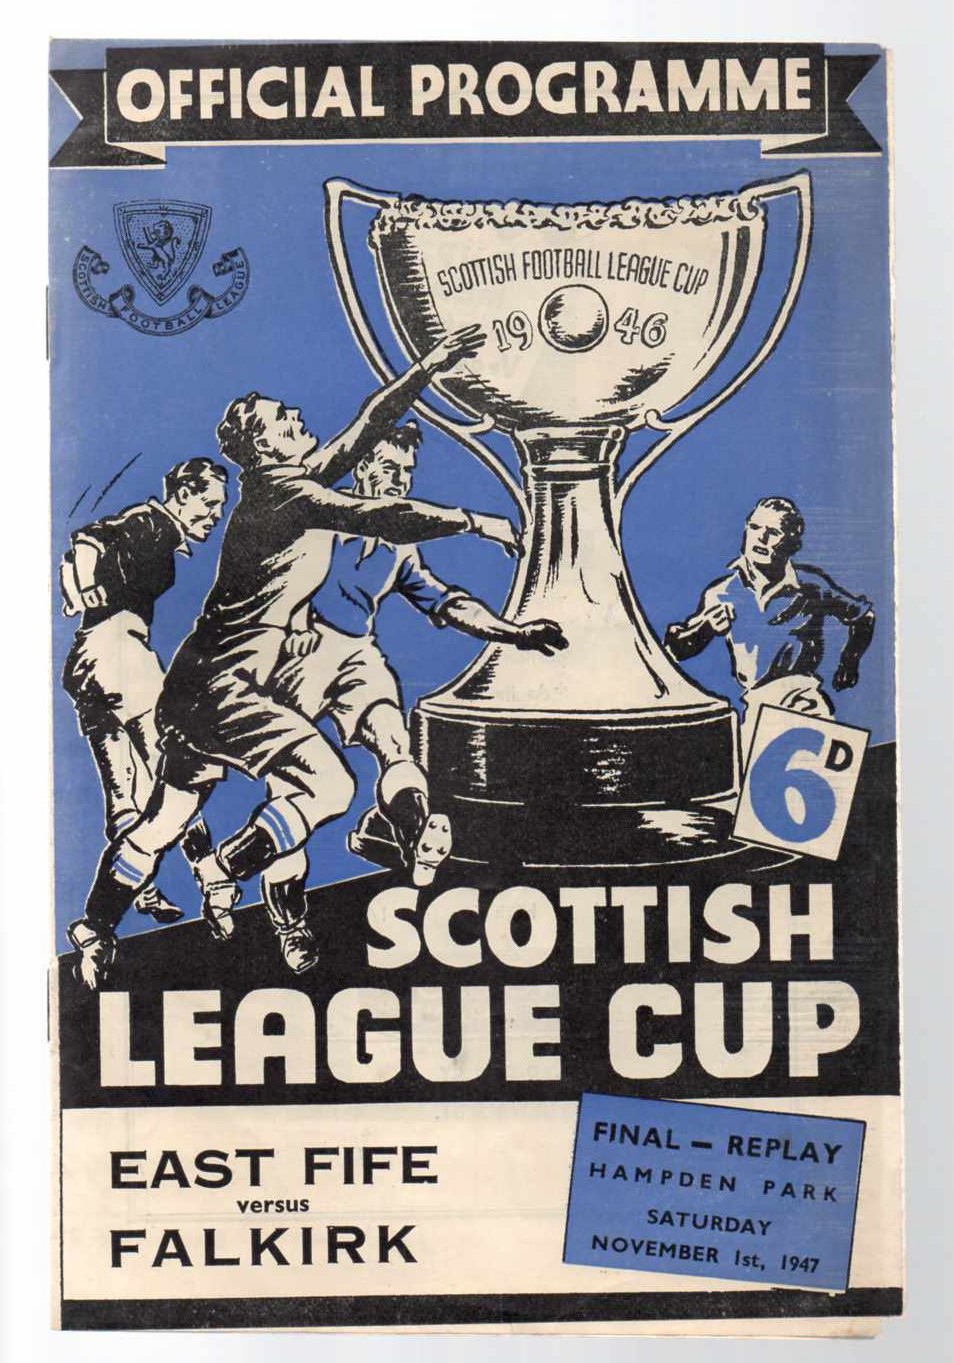 Scottish Cup League Cup Final Football Programme: A programme for the 1947 Scottish  League Cup